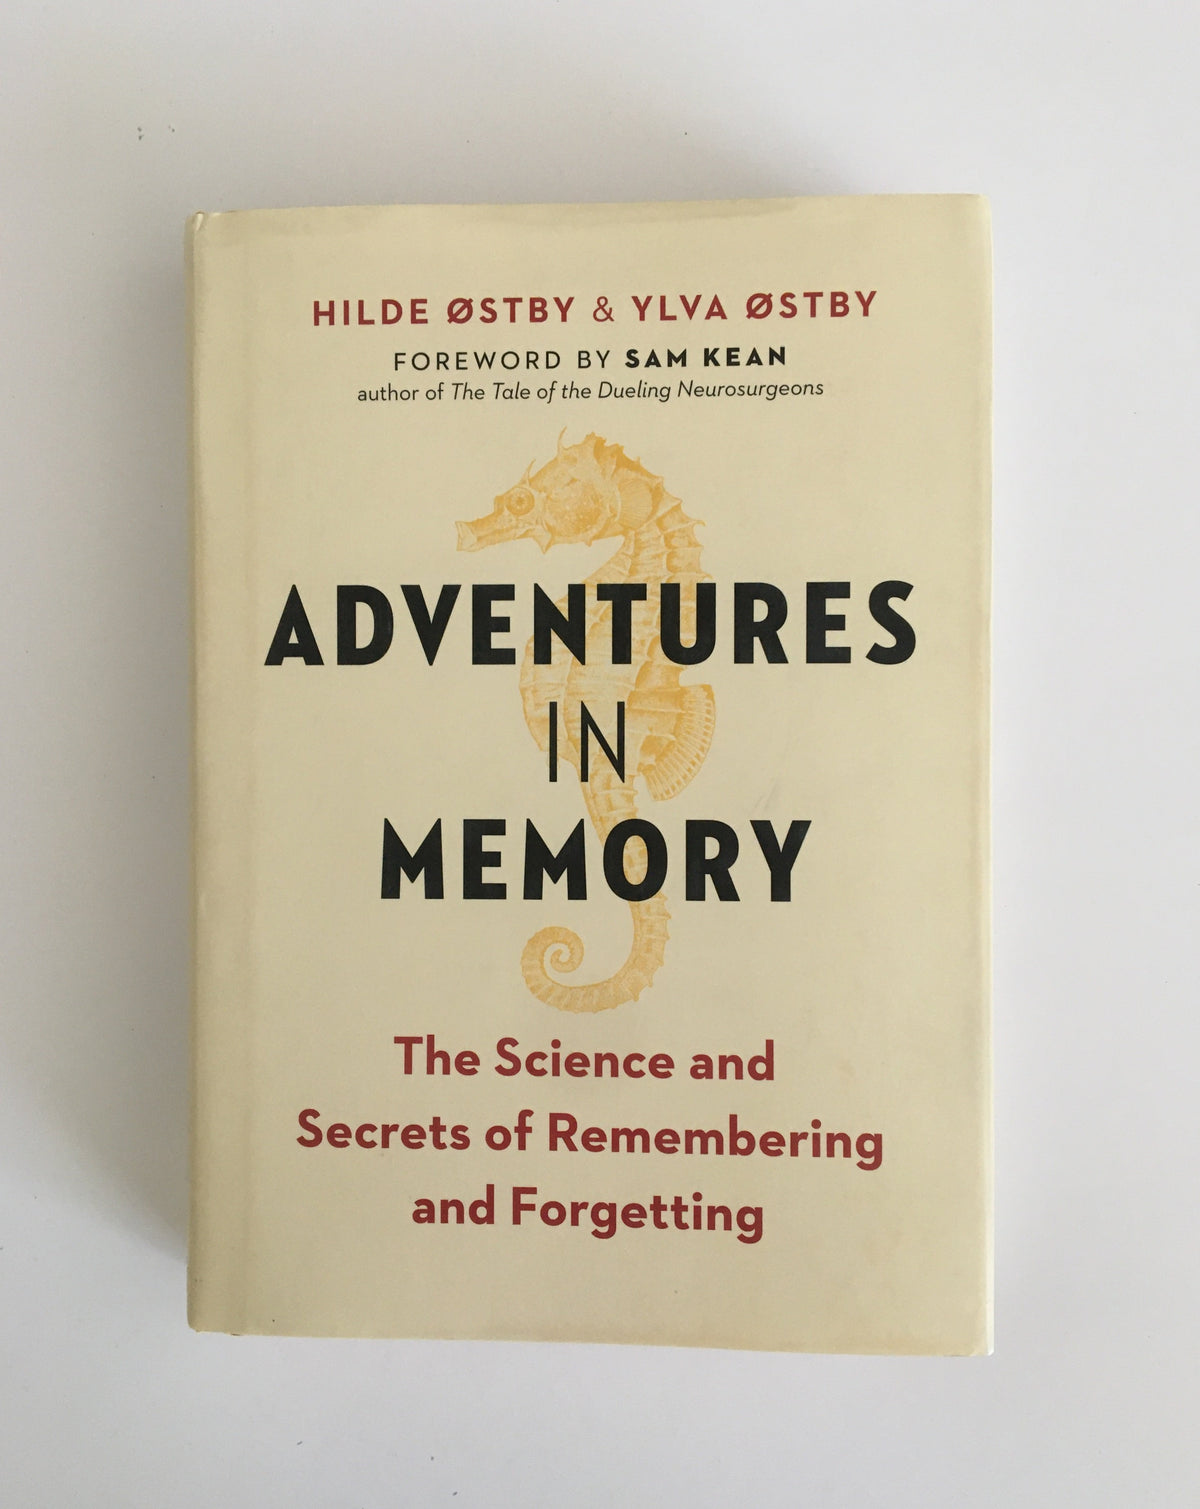 Adventures in Memory by Hilde Ostby &amp; Yluva Ostby